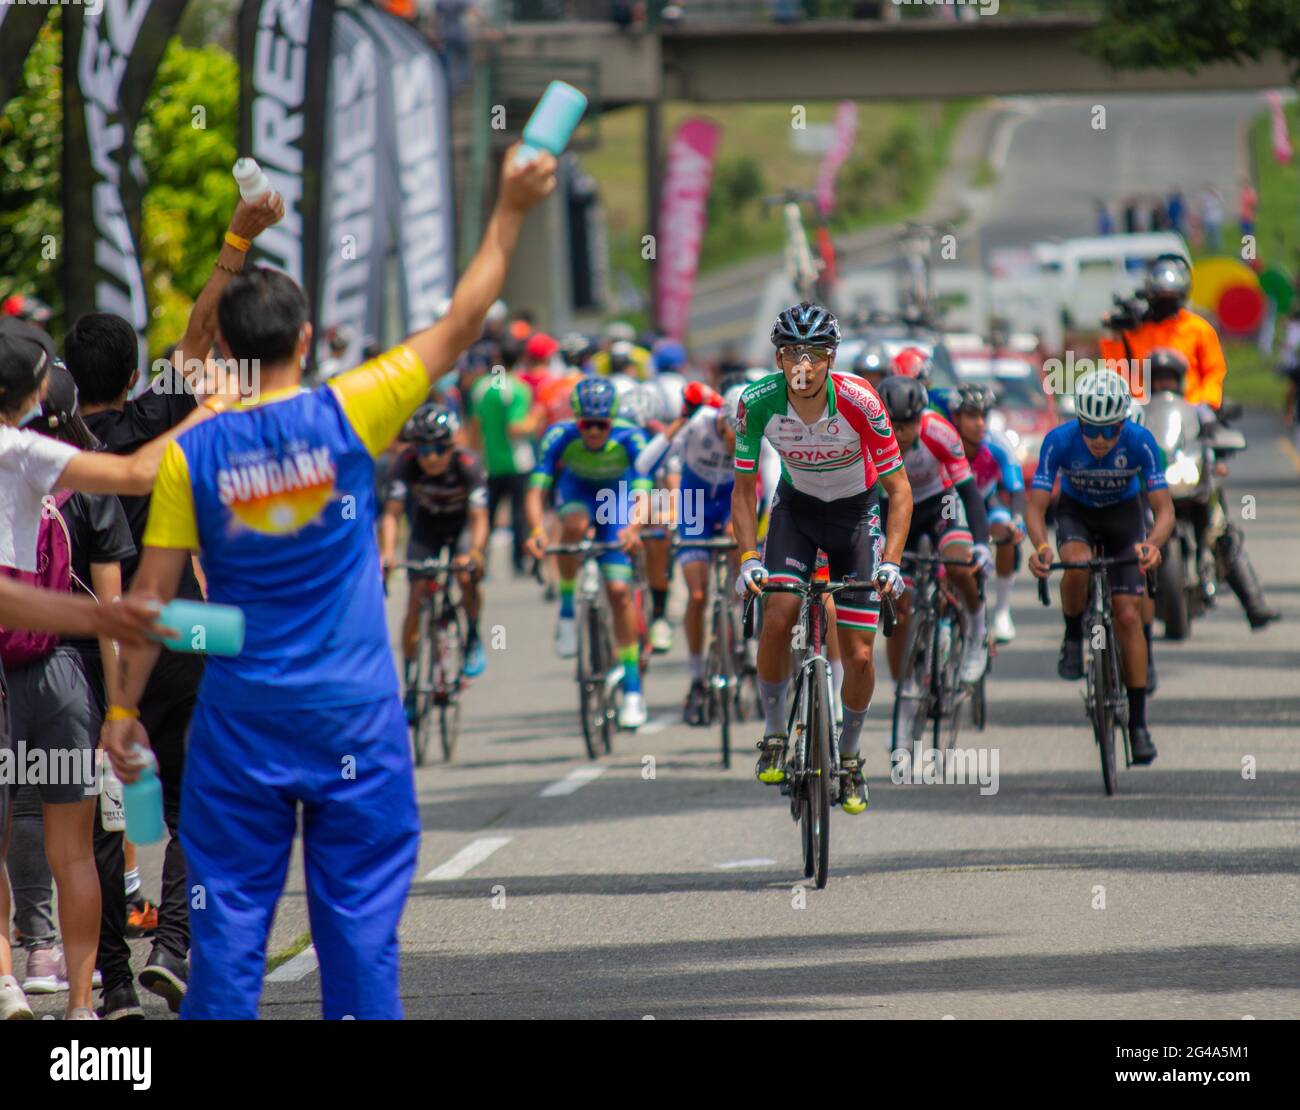 Cyclists passing by the refreshment line of the Liga de Boyaca team during the SUB-23 Qualifiers Colombian National Road Race Bicycle Championship in Pereira, Colombia on June 19, 2021. Stock Photo